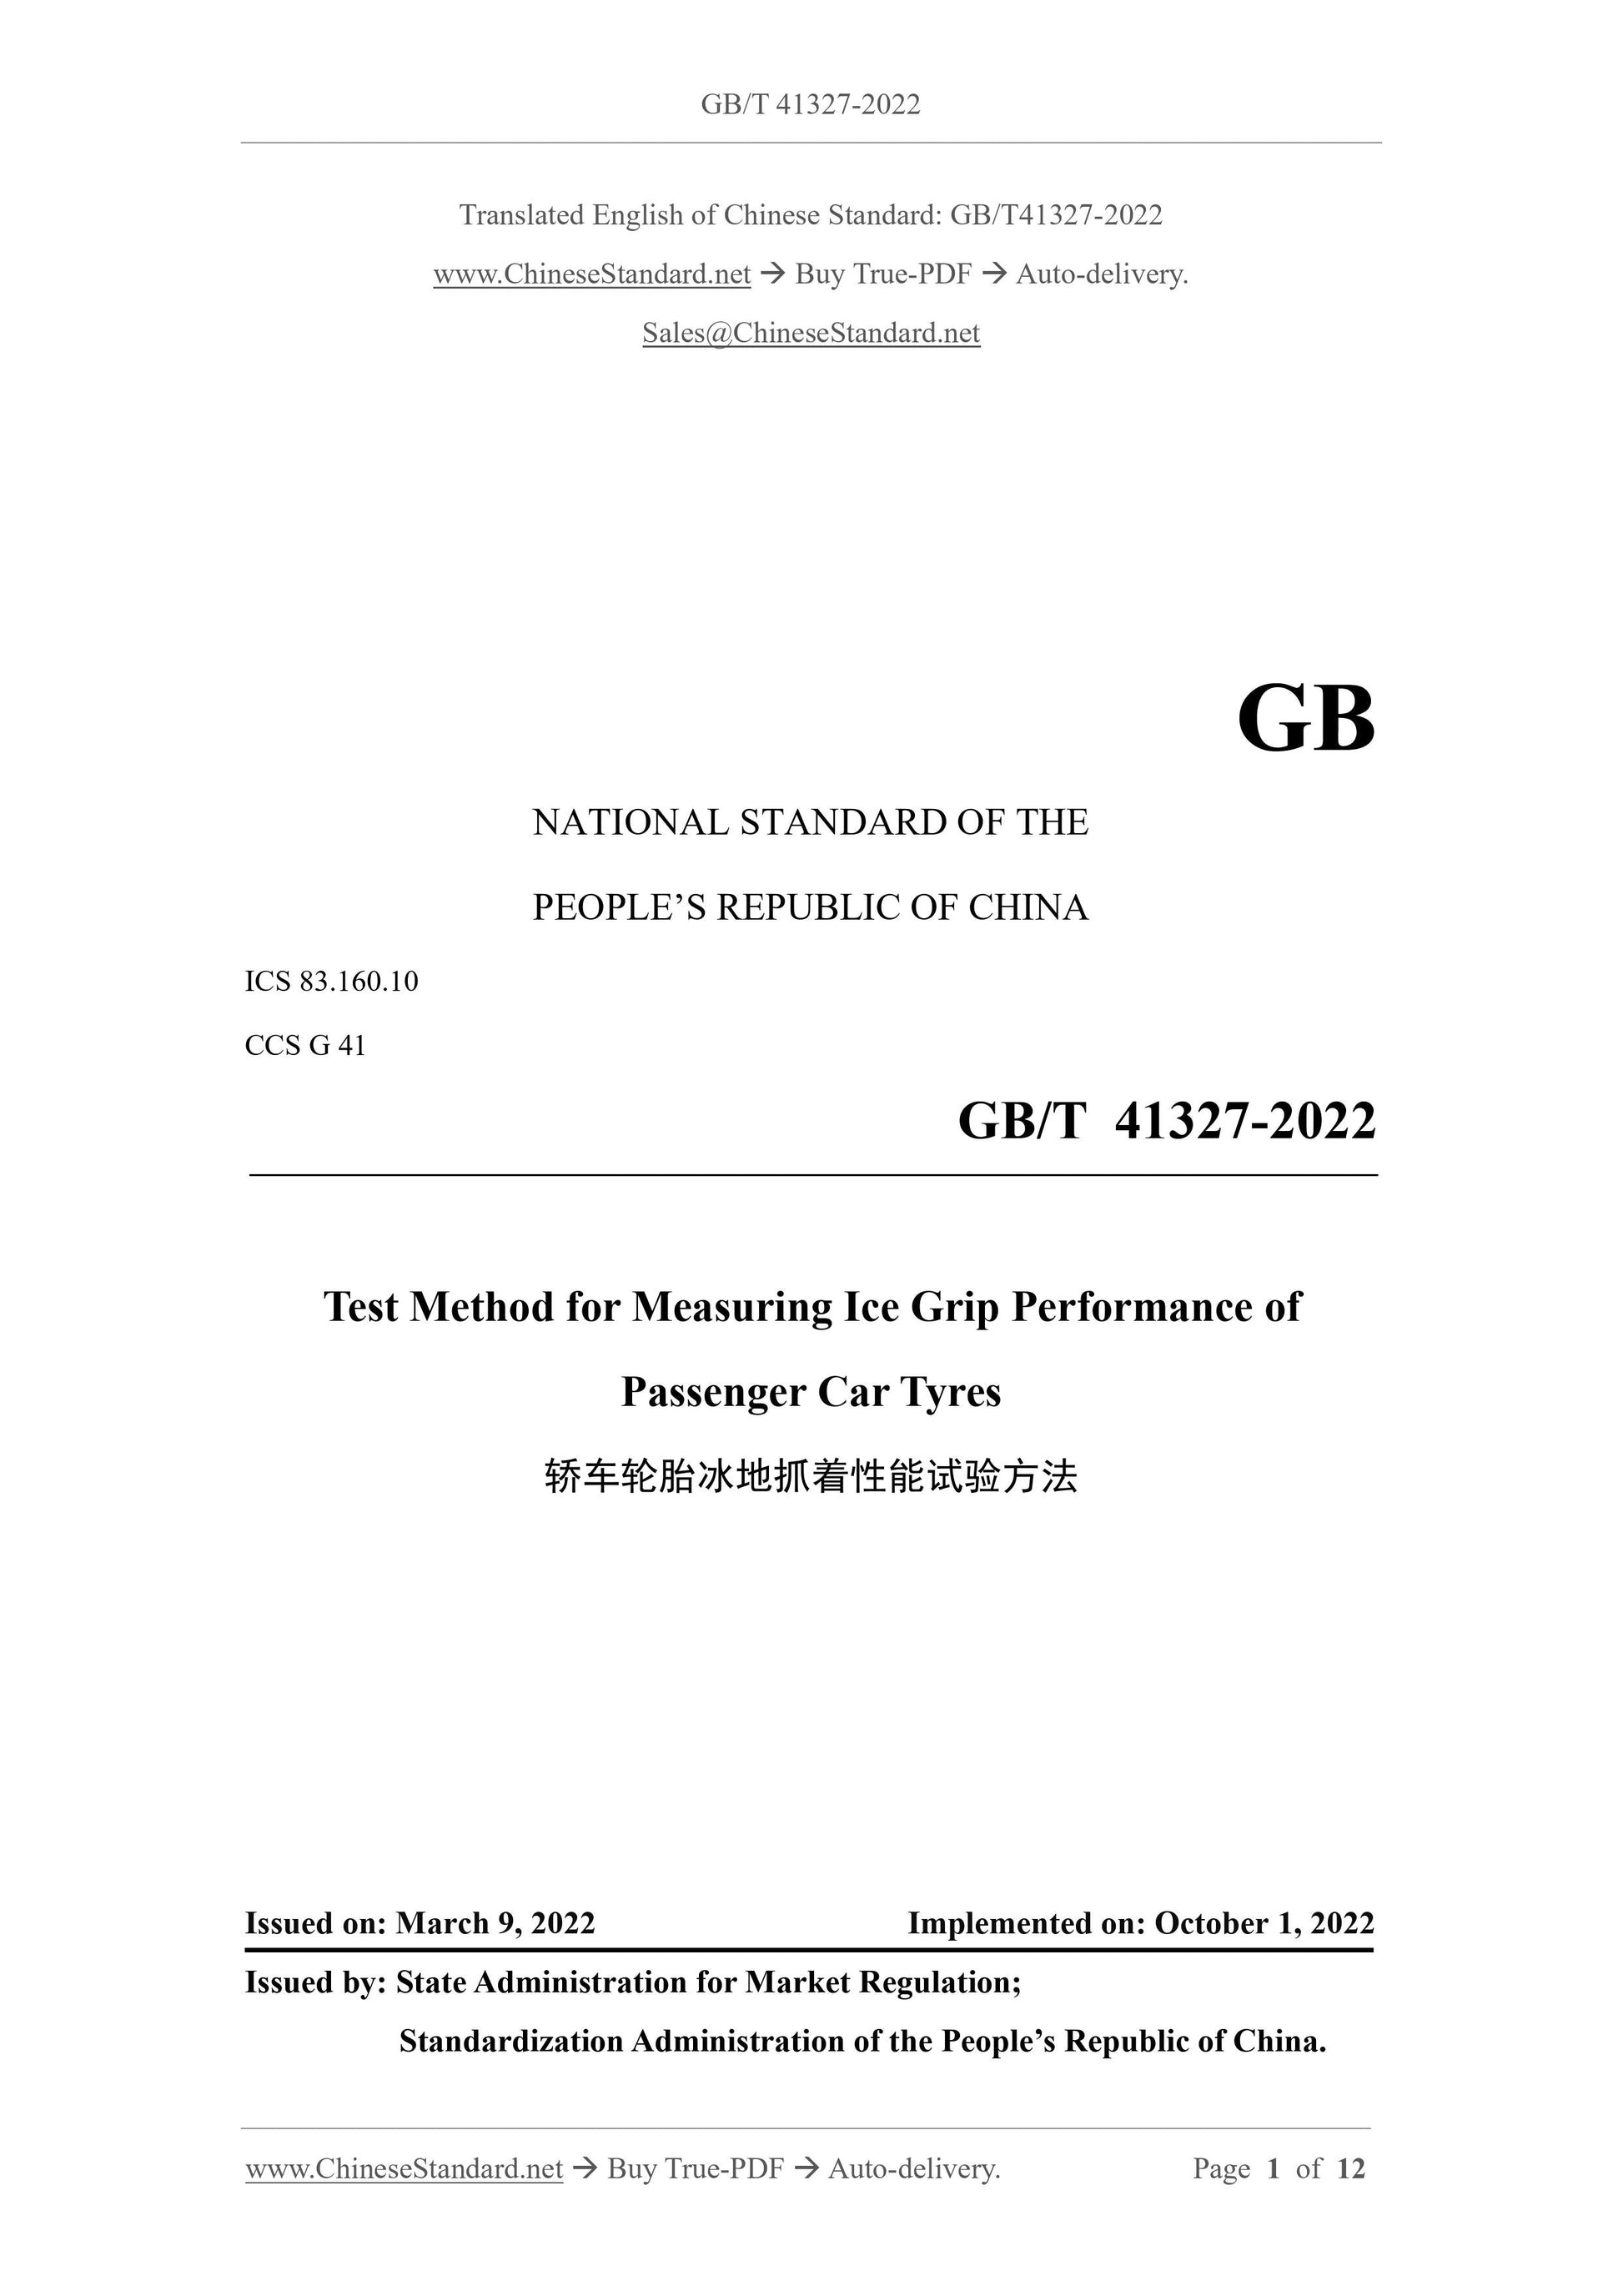 GB/T 41327-2022 Page 1